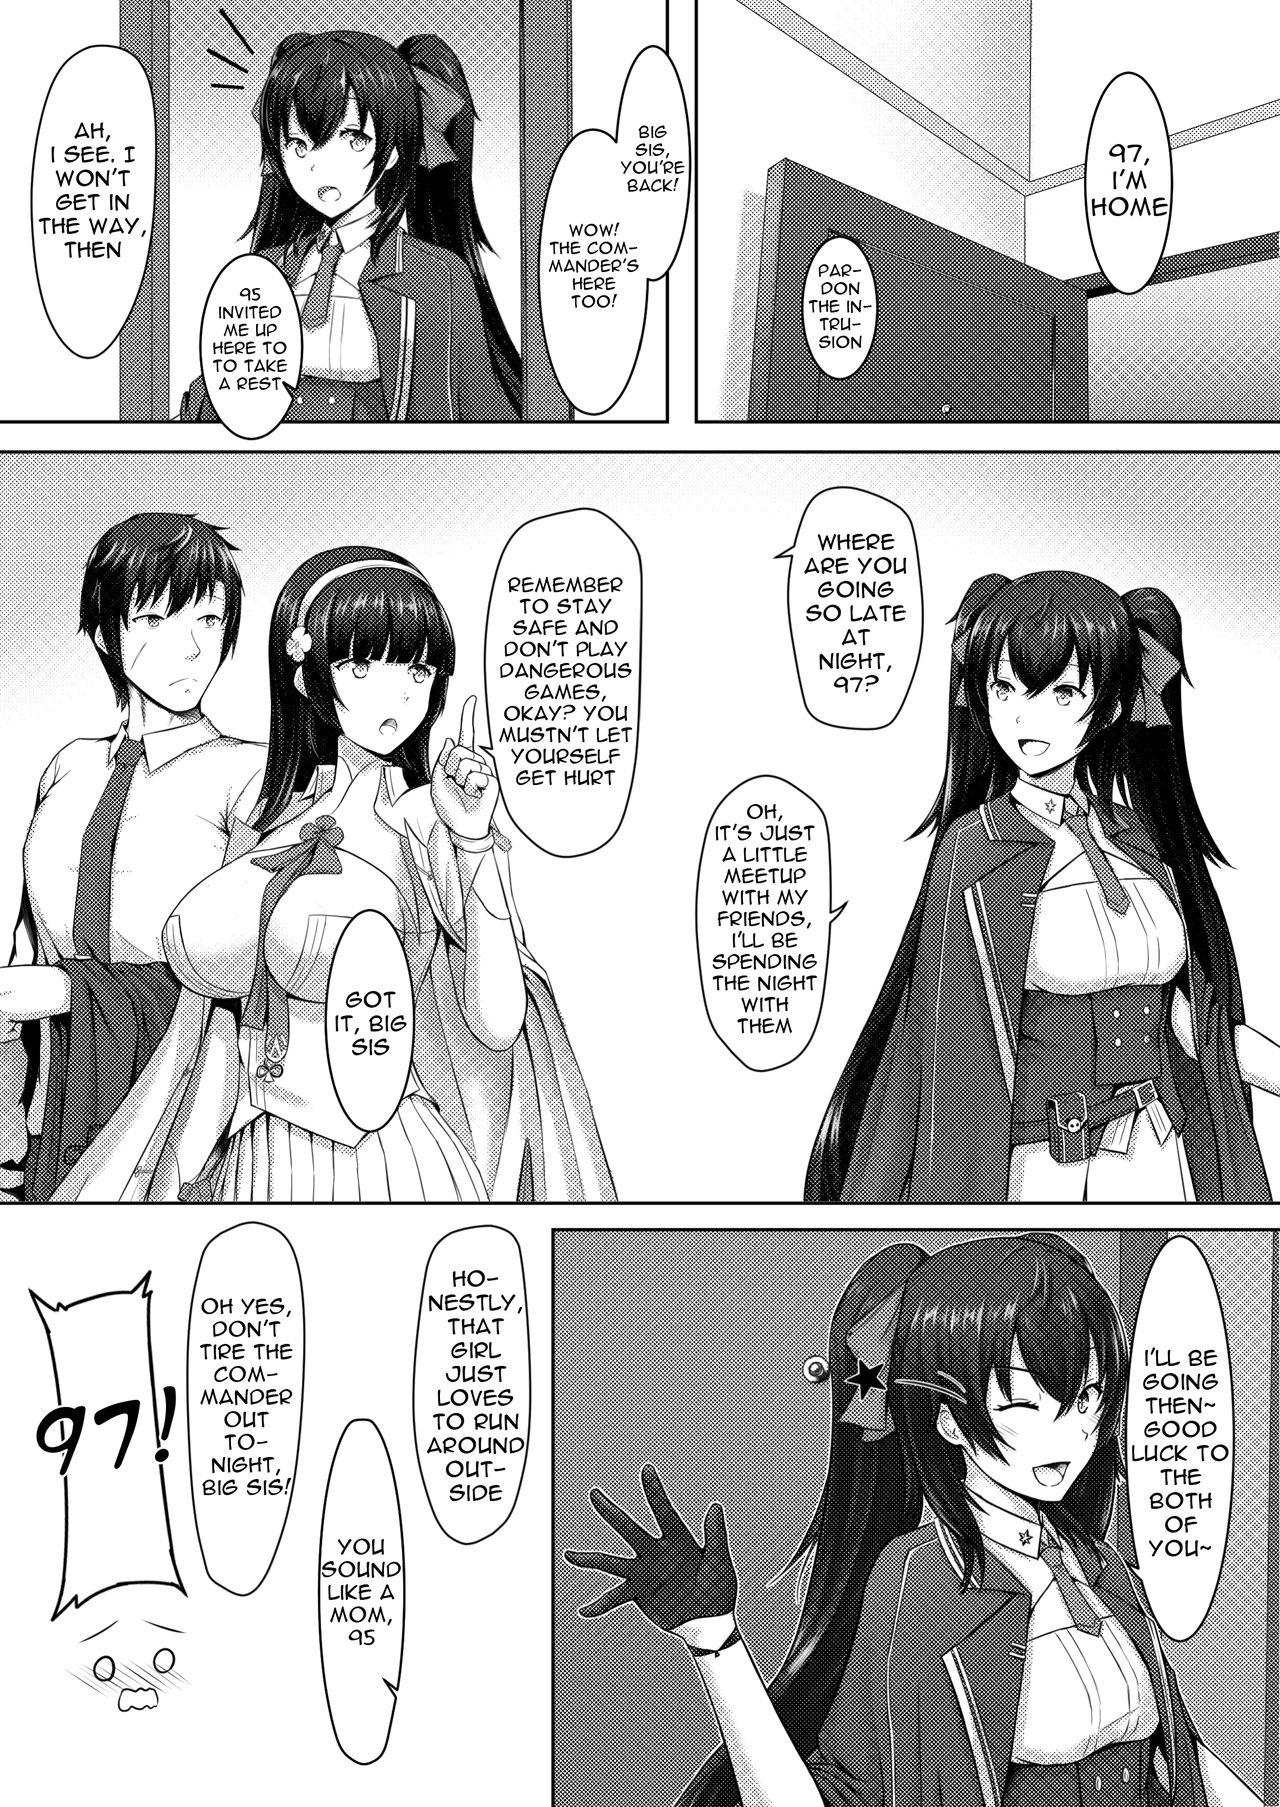 Outside A Lovely Flower's Gift - Girls frontline Amateur - Page 4